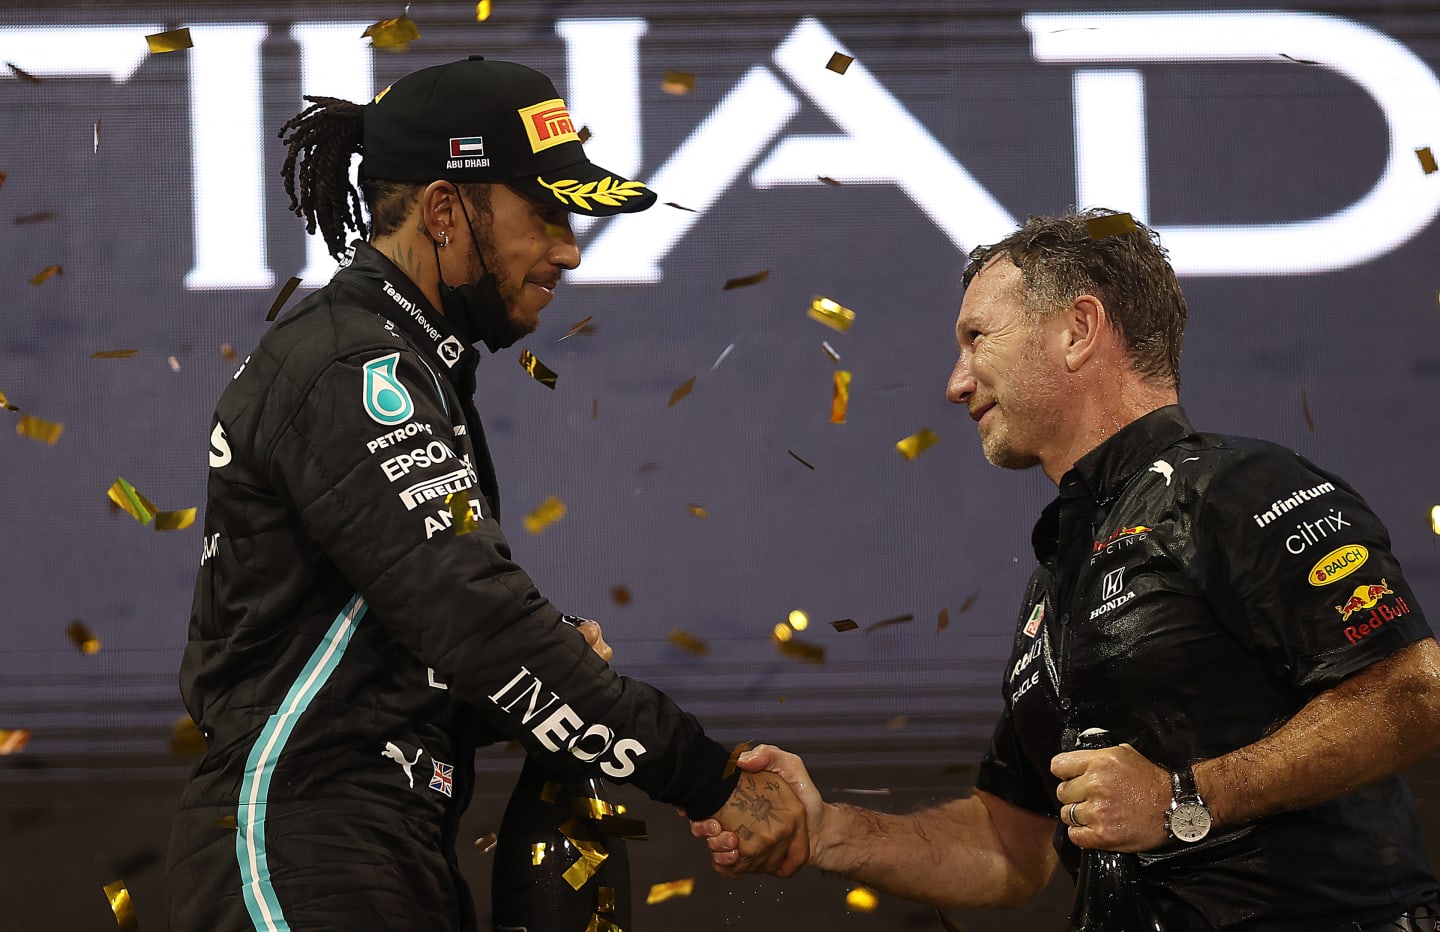 ABU DHABI, UNITED ARAB EMIRATES - DECEMBER 12: Red Bull Racing Team Principal Christian Horner shakes hands with second placed Lewis Hamilton of Great Britain and Mercedes GP on the podium during the F1 Grand Prix of Abu Dhabi at Yas Marina Circuit on December 12, 2021 in Abu Dhabi, United Arab Emirates. (Photo by Lars Baron/Getty Images)